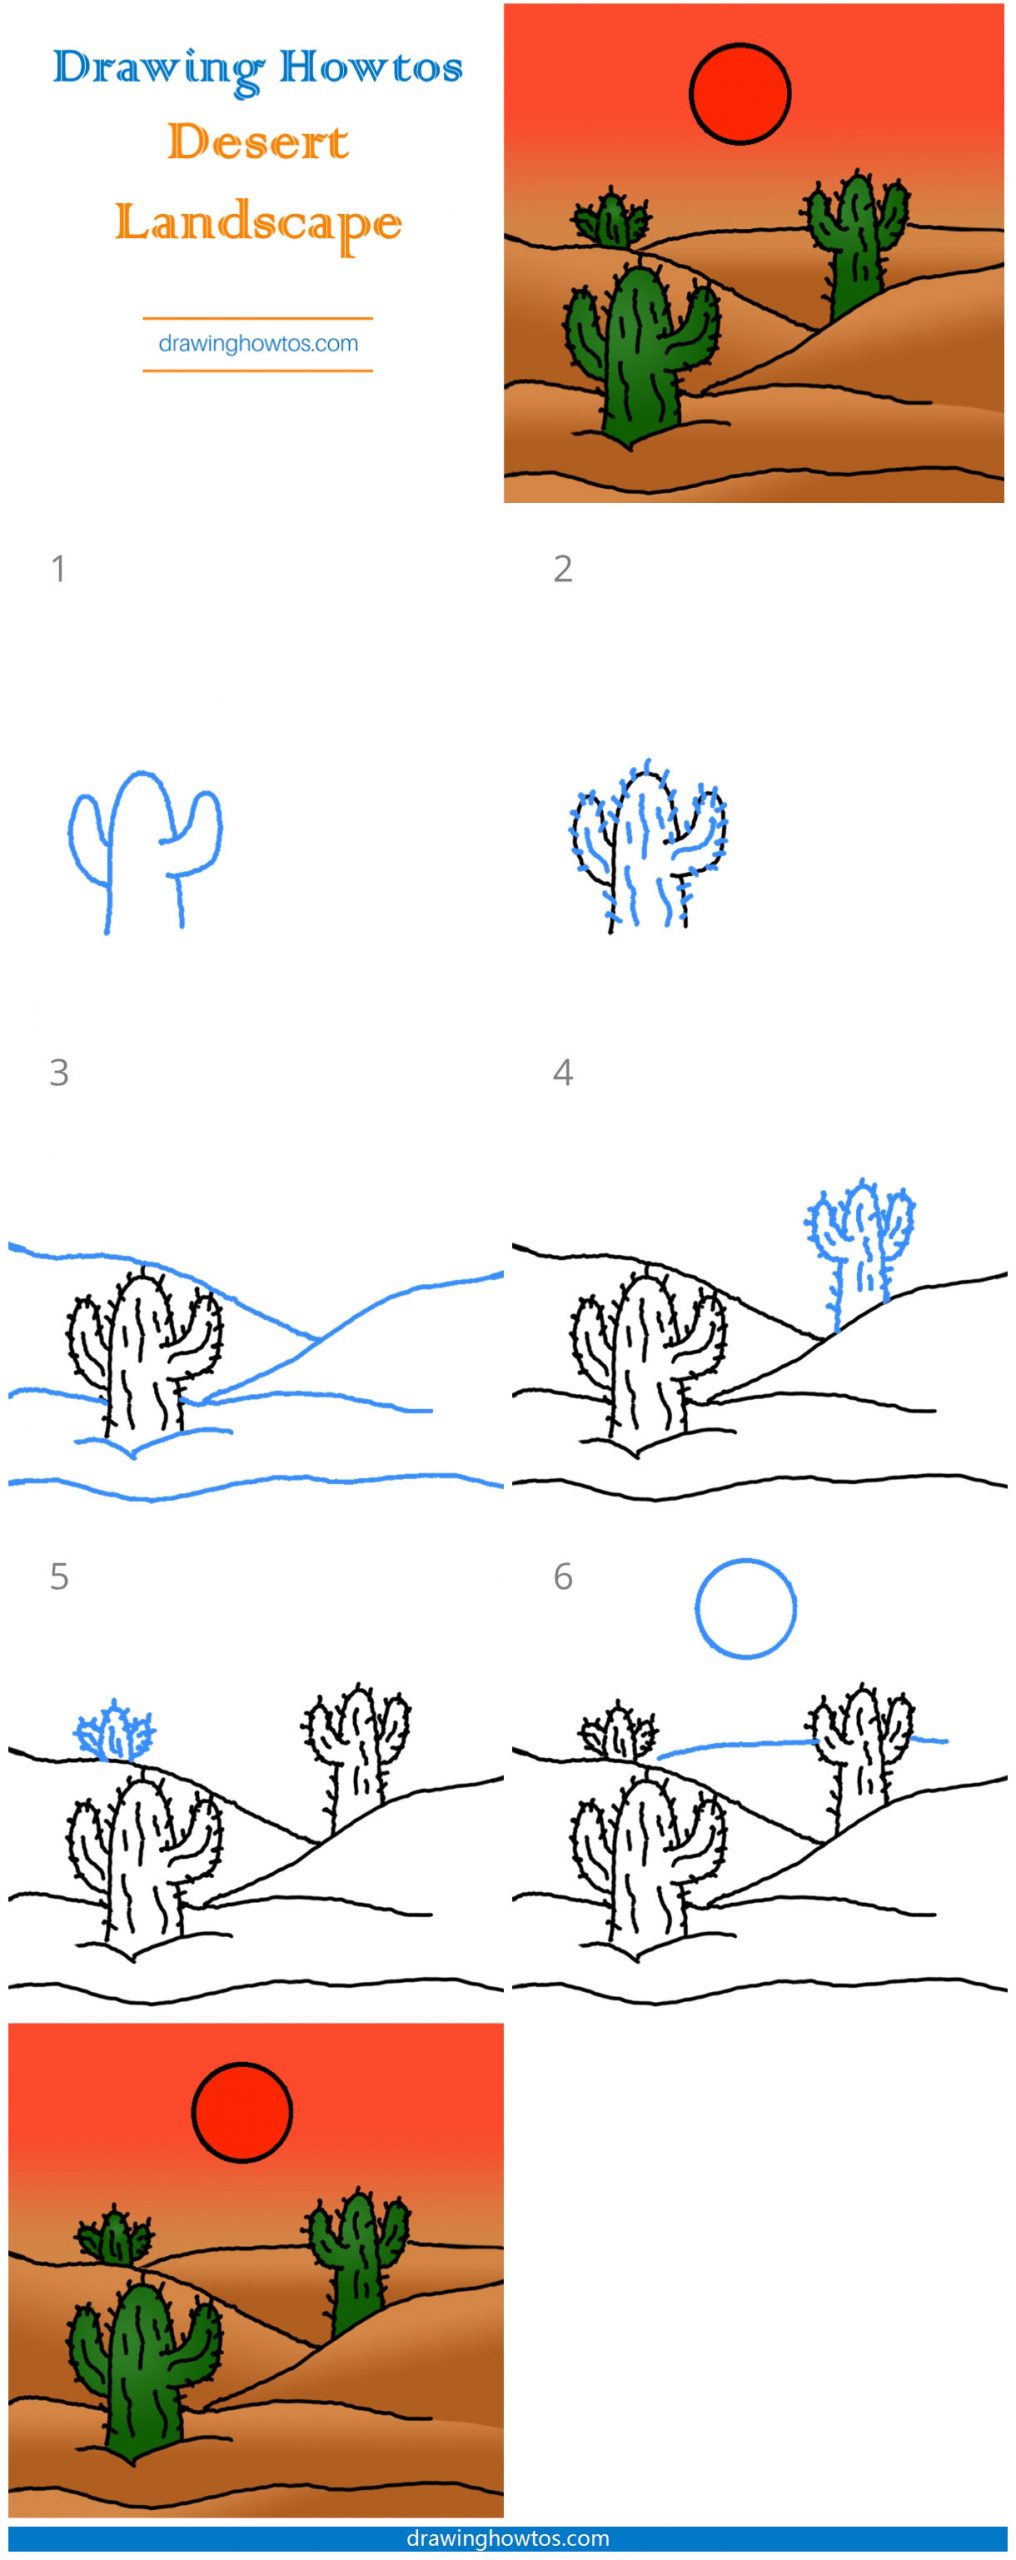 How to Draw a Desert Landscape Step by Step